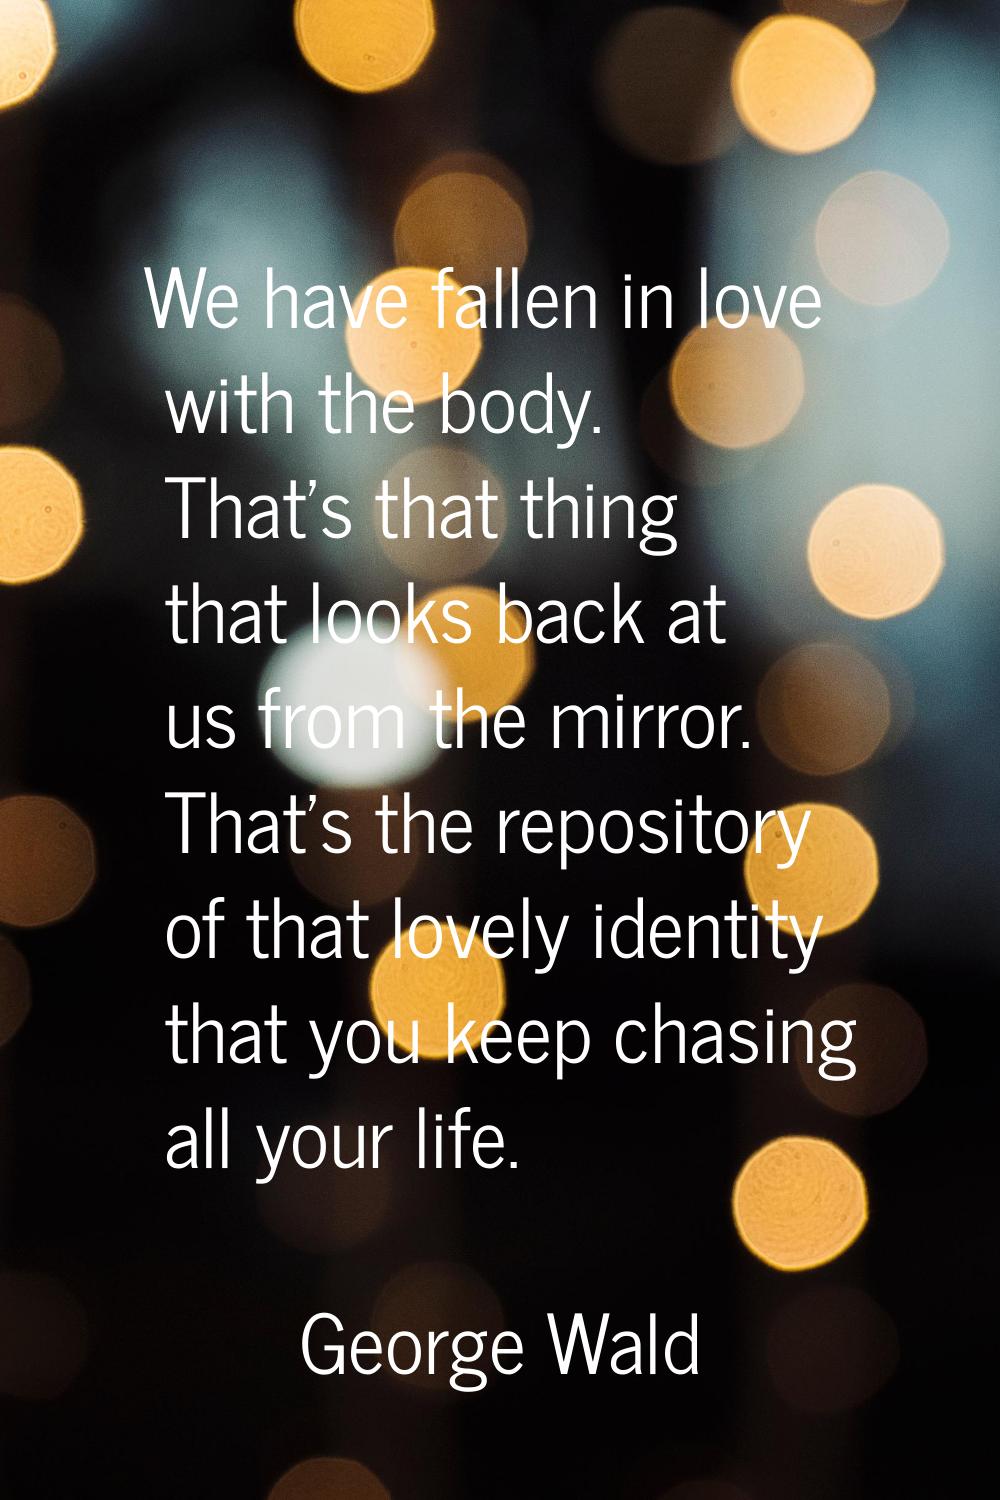 We have fallen in love with the body. That's that thing that looks back at us from the mirror. That